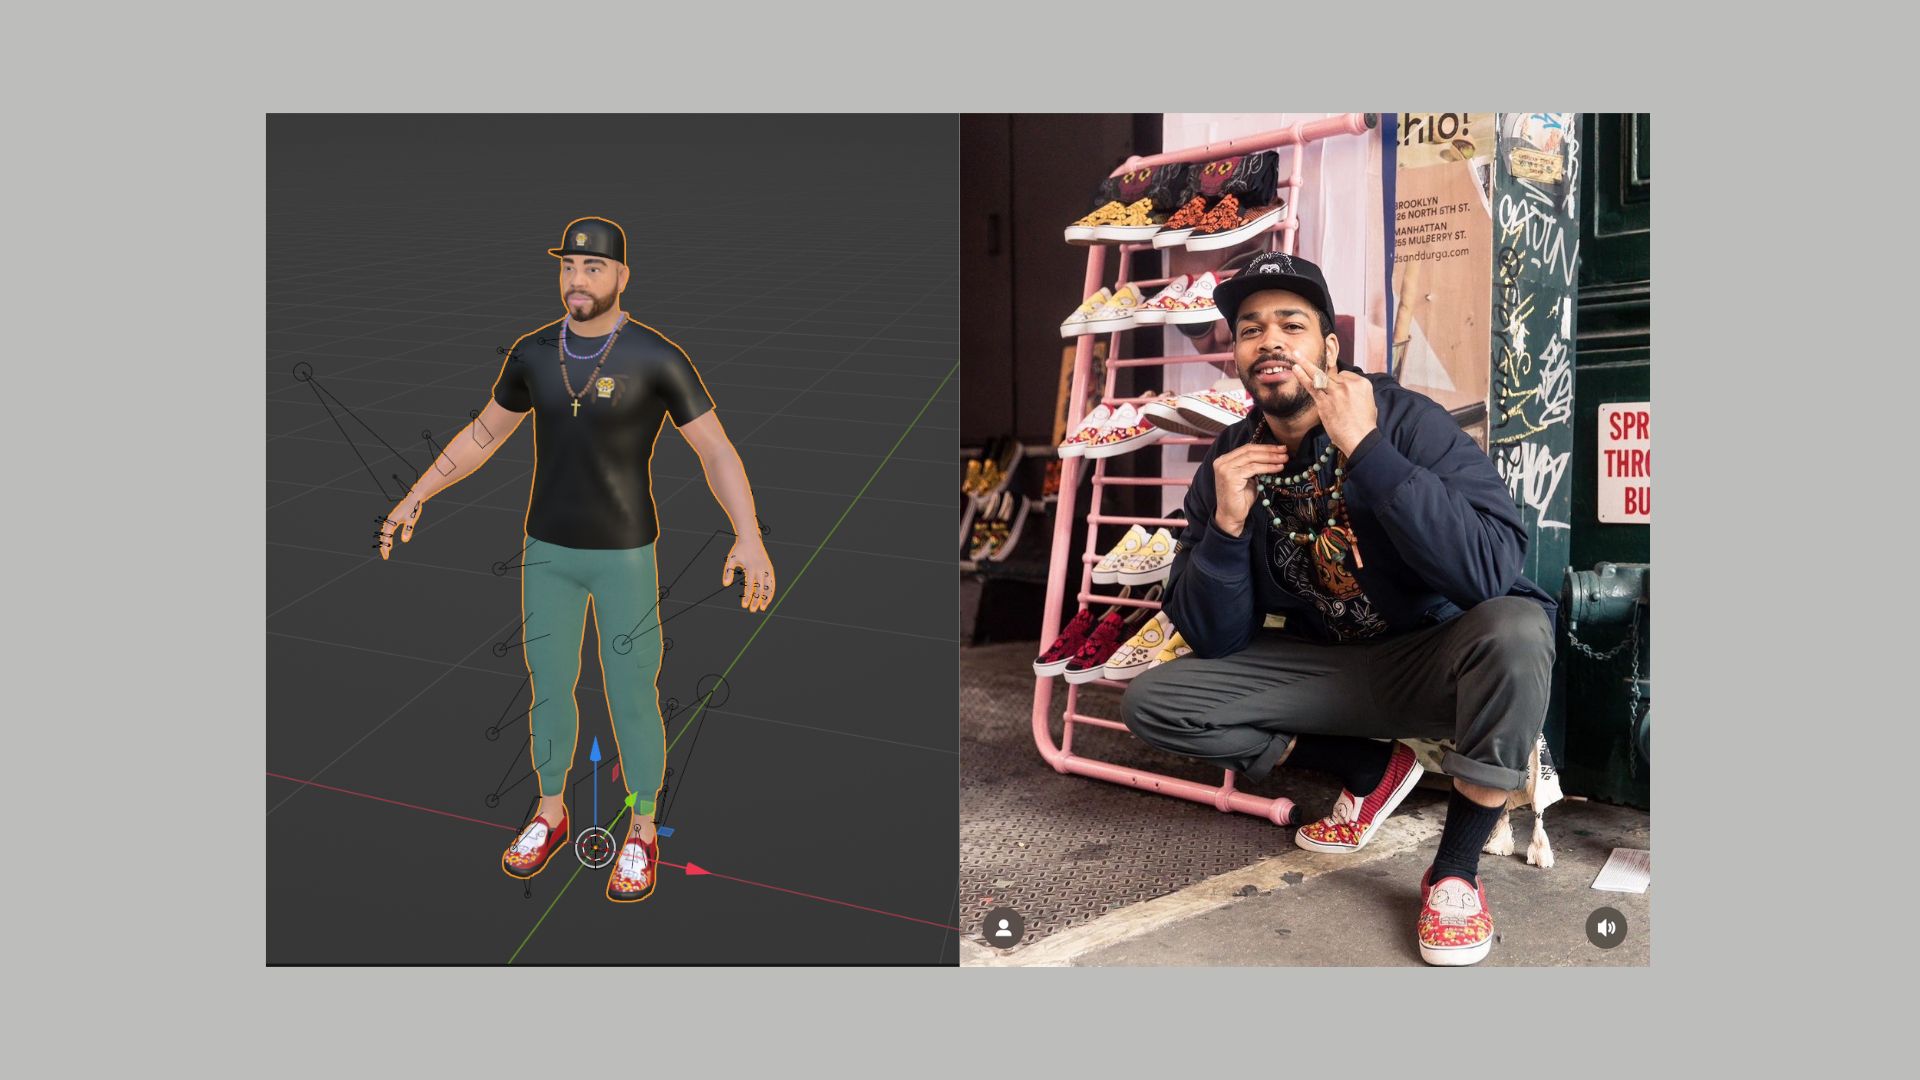 an npc avatar on the left, with a photo of the human model on the right.